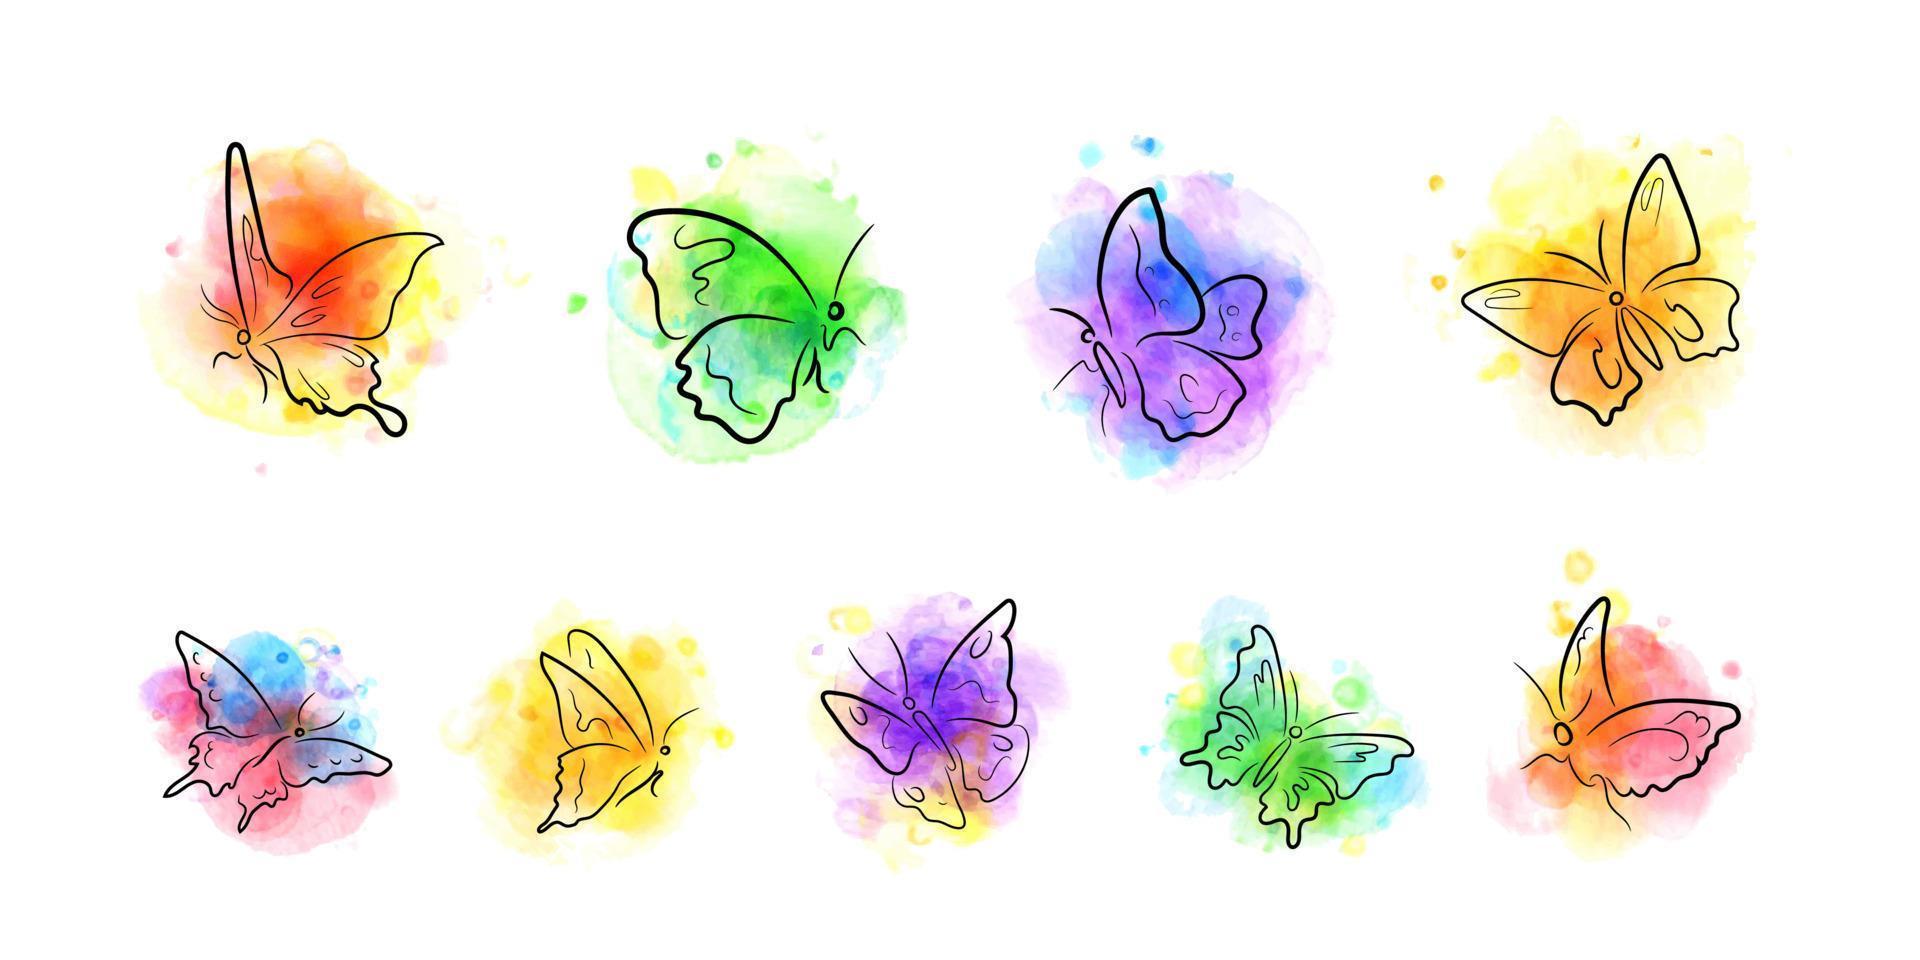 Ink drawn butterflies on bright watercolor spots vector